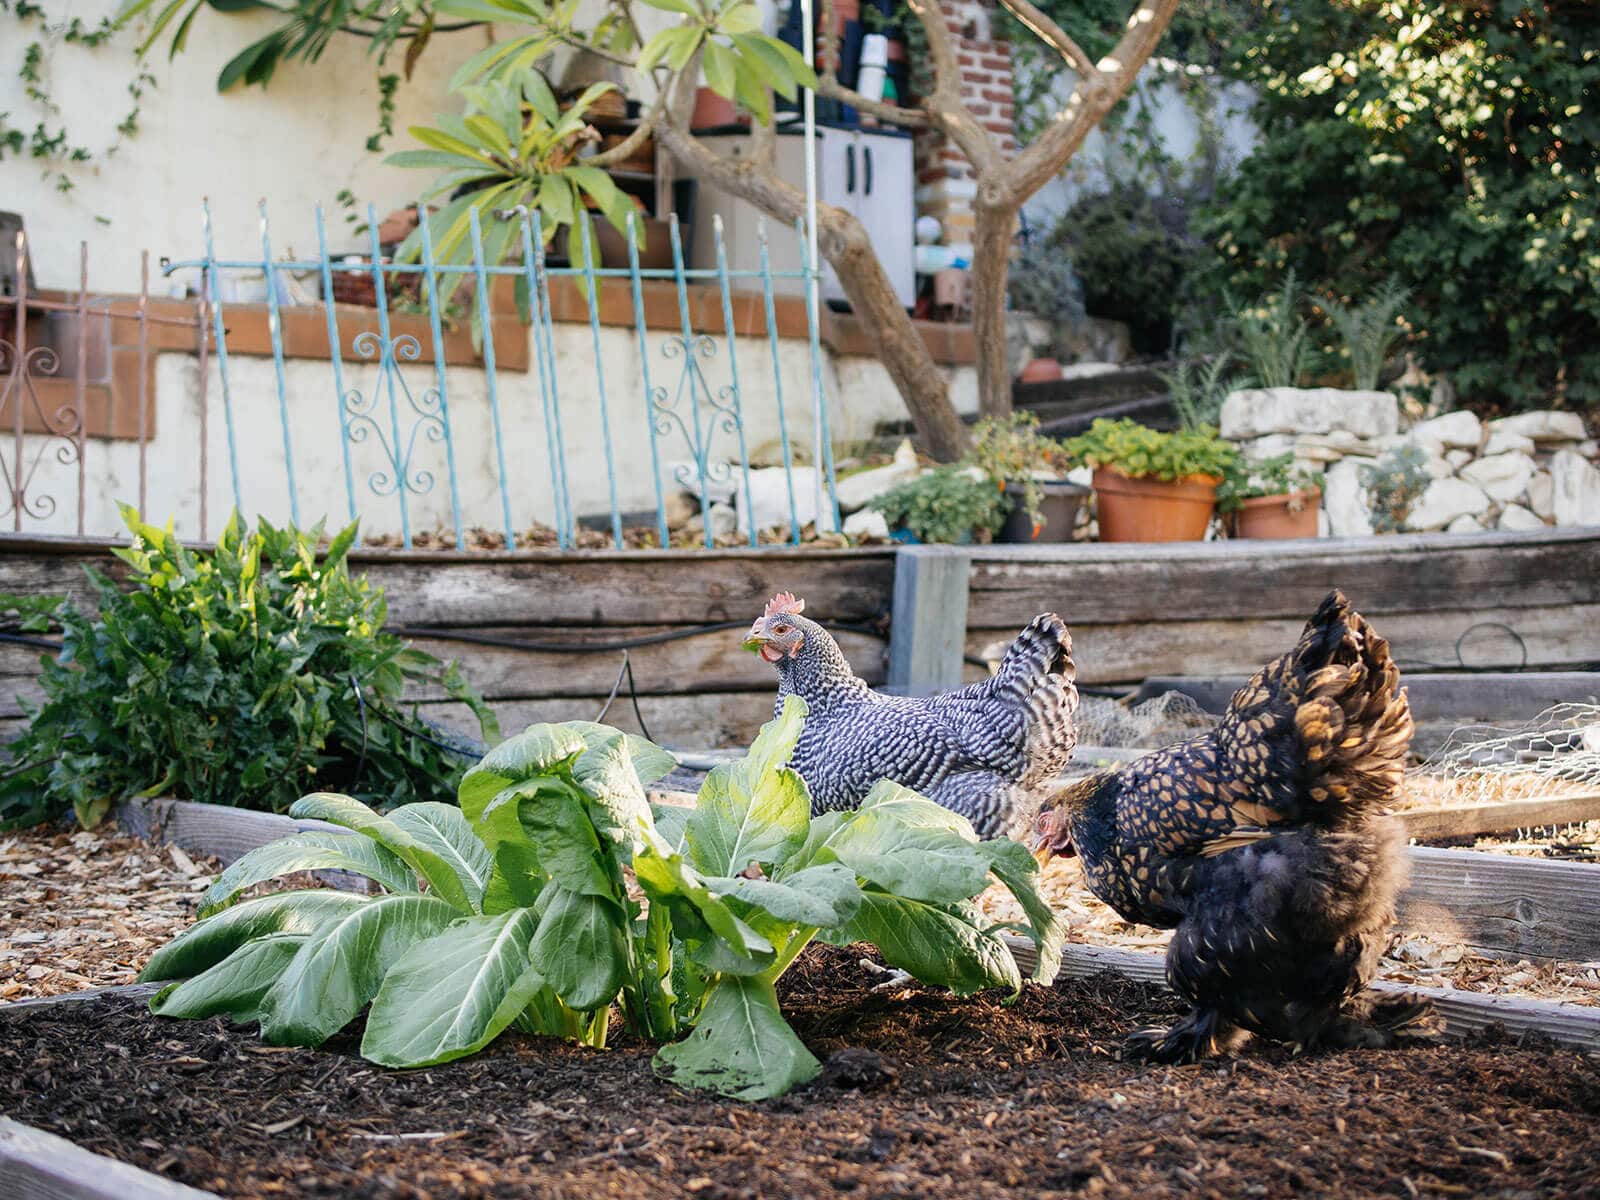 Chickens foraging in a raised bed garden